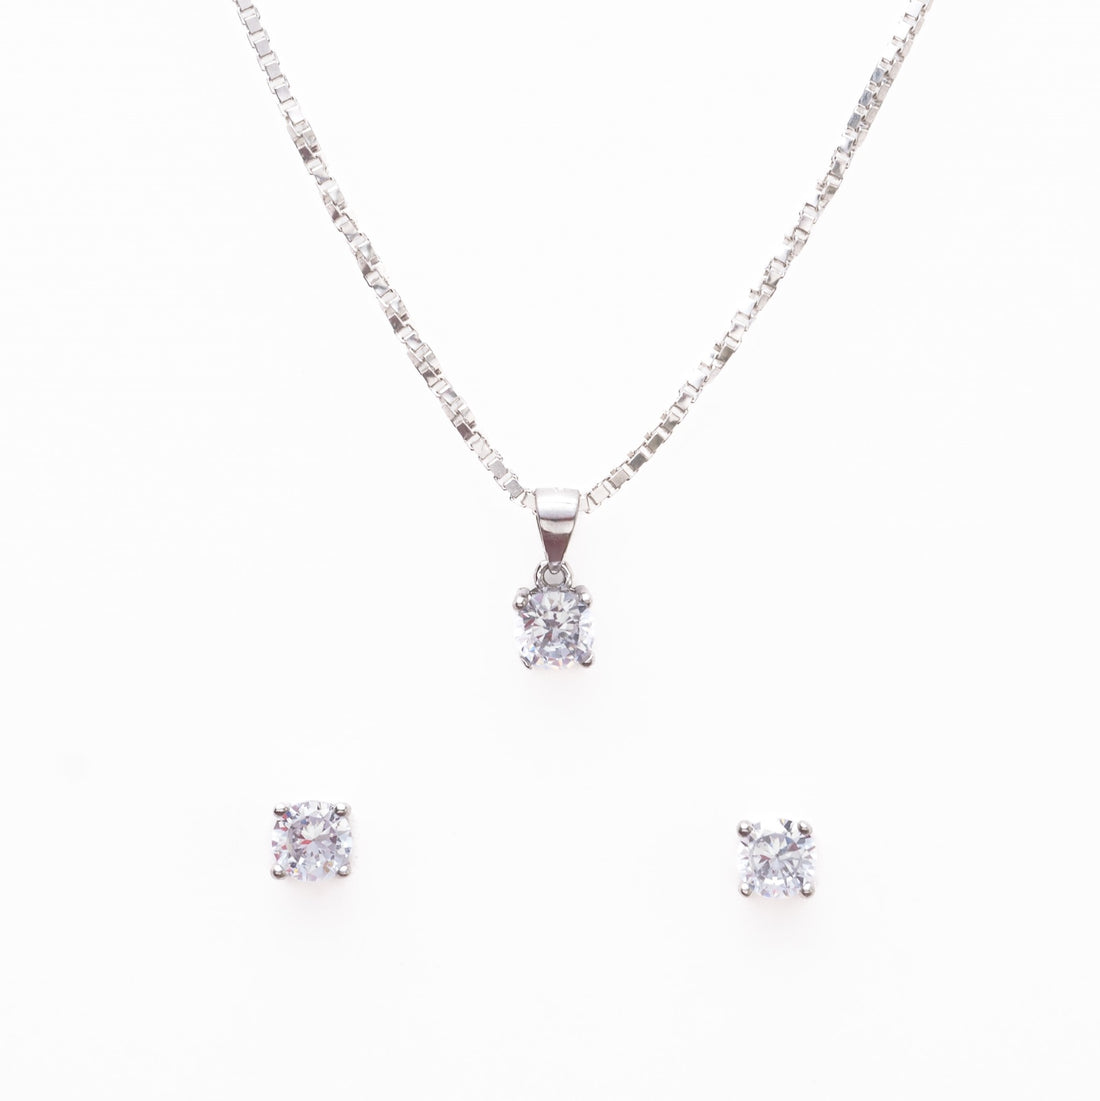 Original Silver Set Chain Pendant and Earrings with Finely Cut Stones for Women